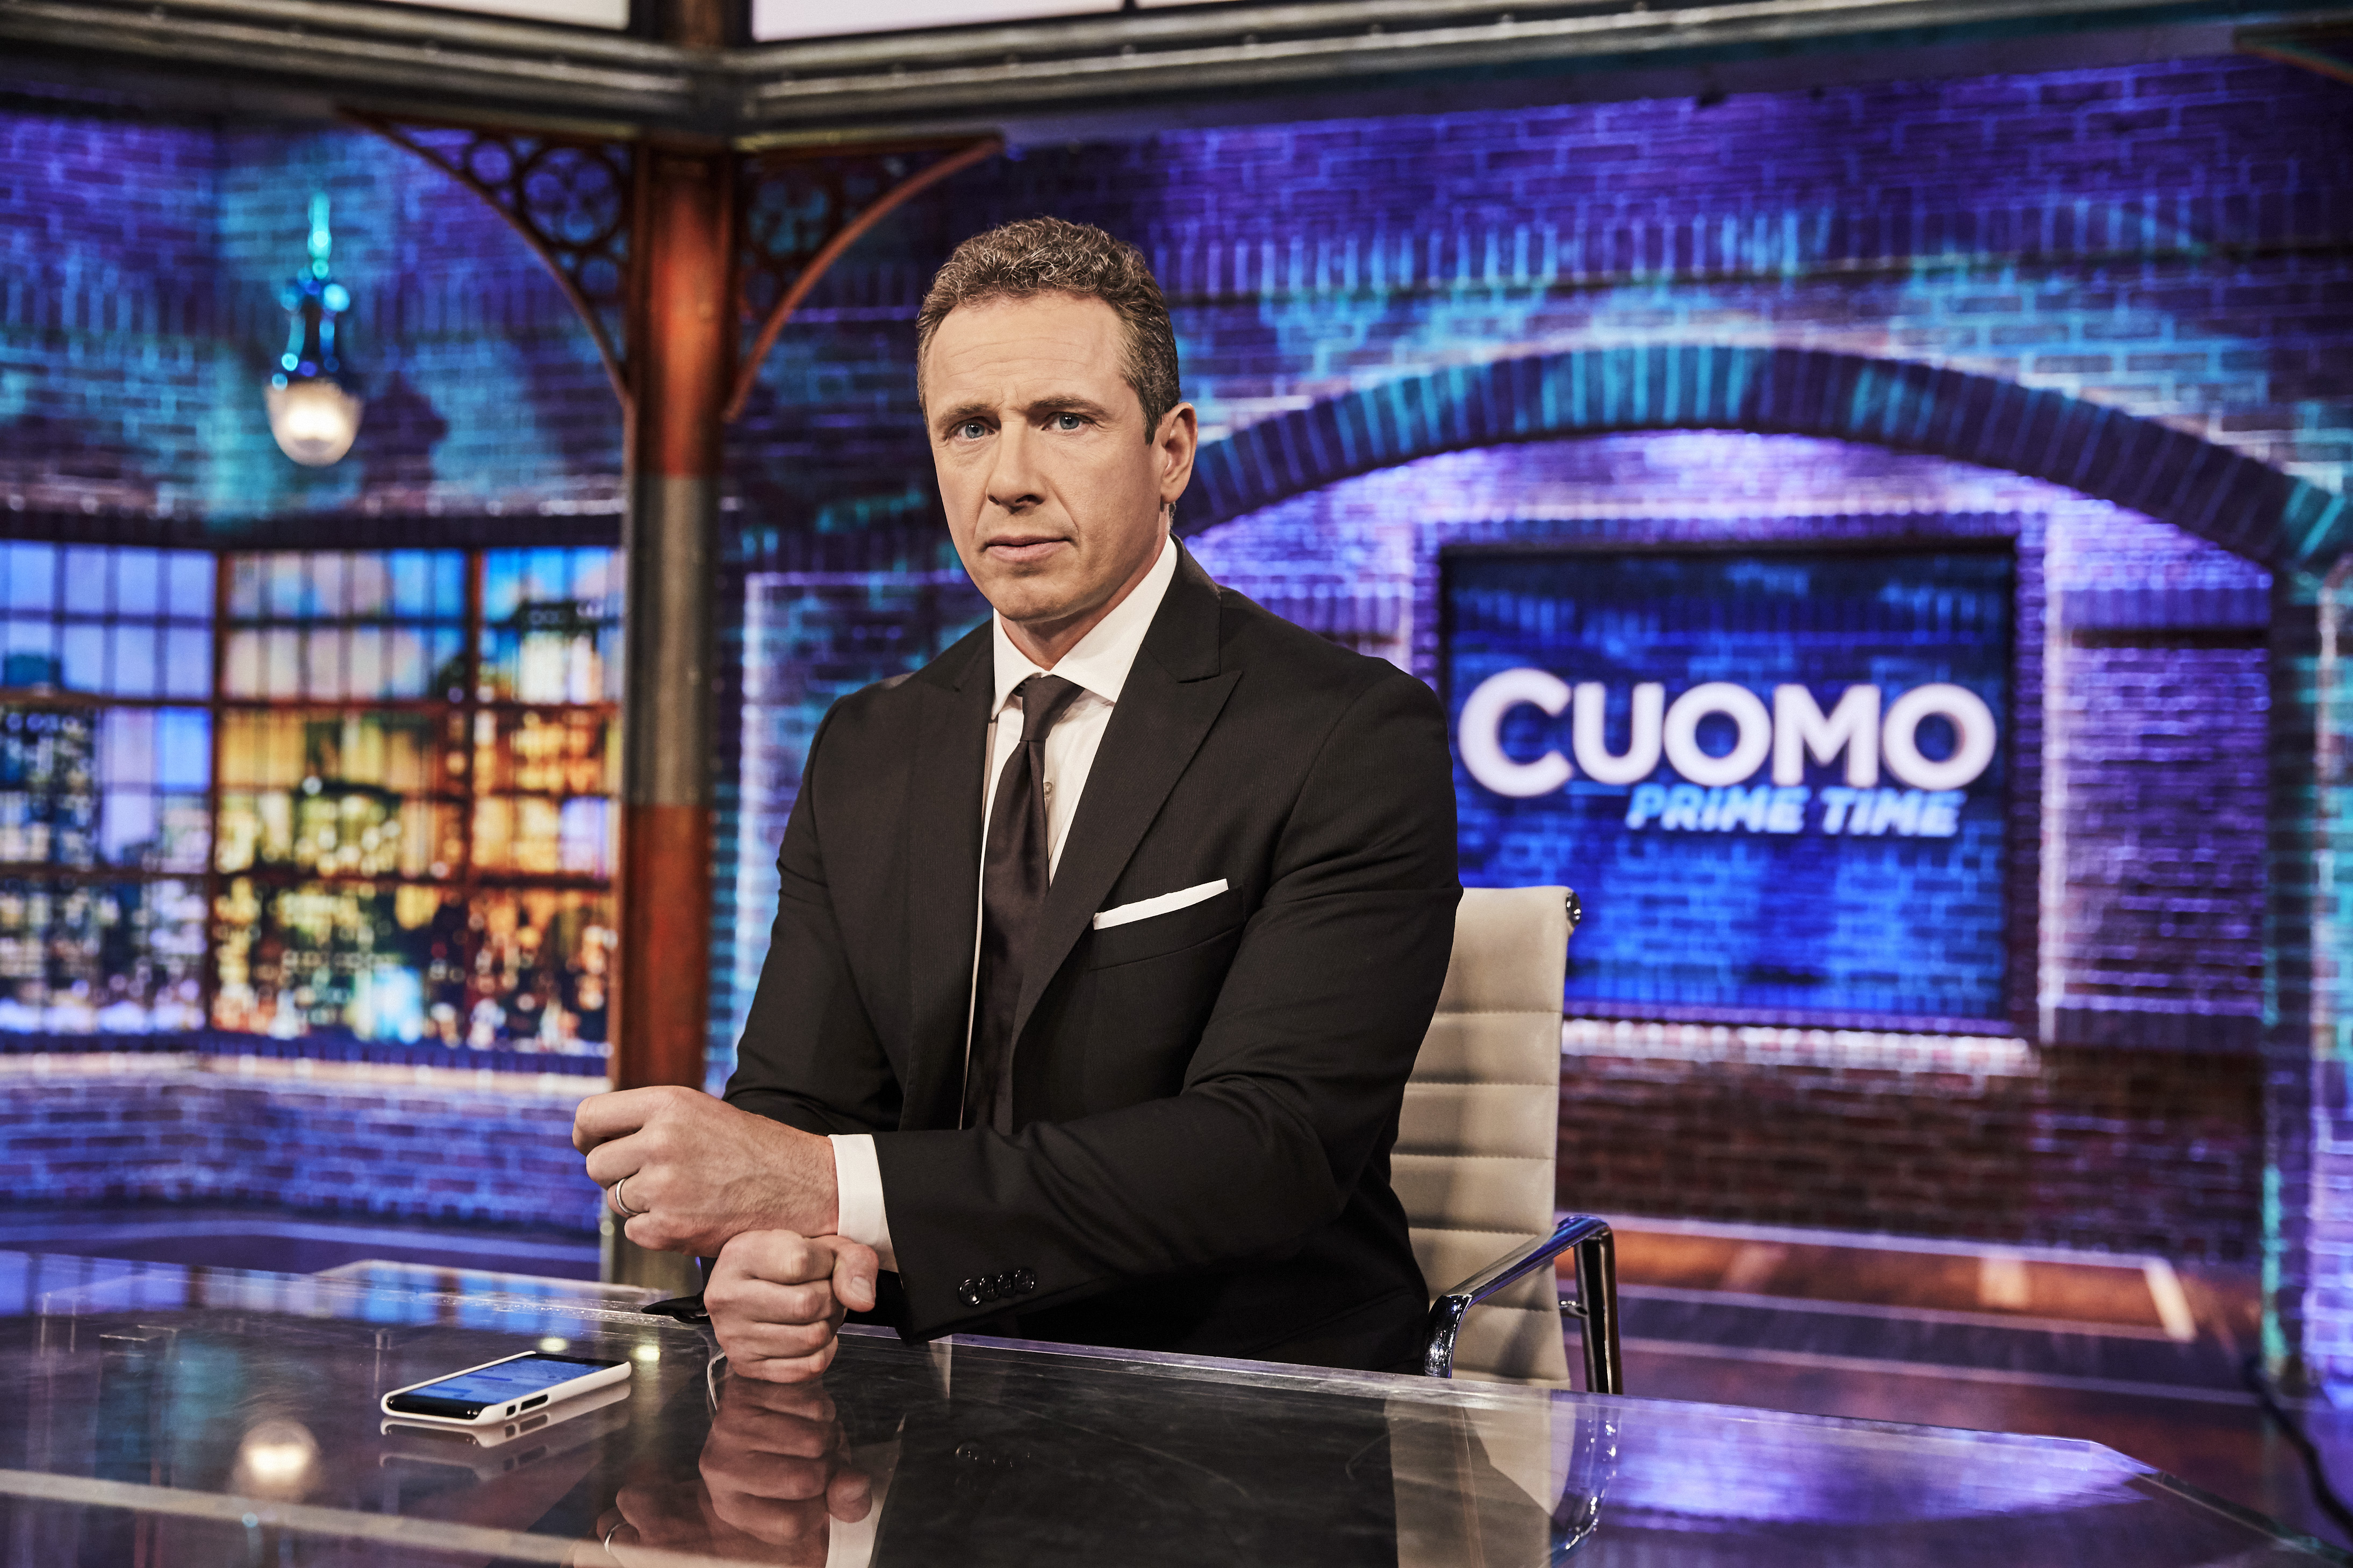 CNN anchor Chris Cuomo diagnosed with coronavirus; he will continue working from home